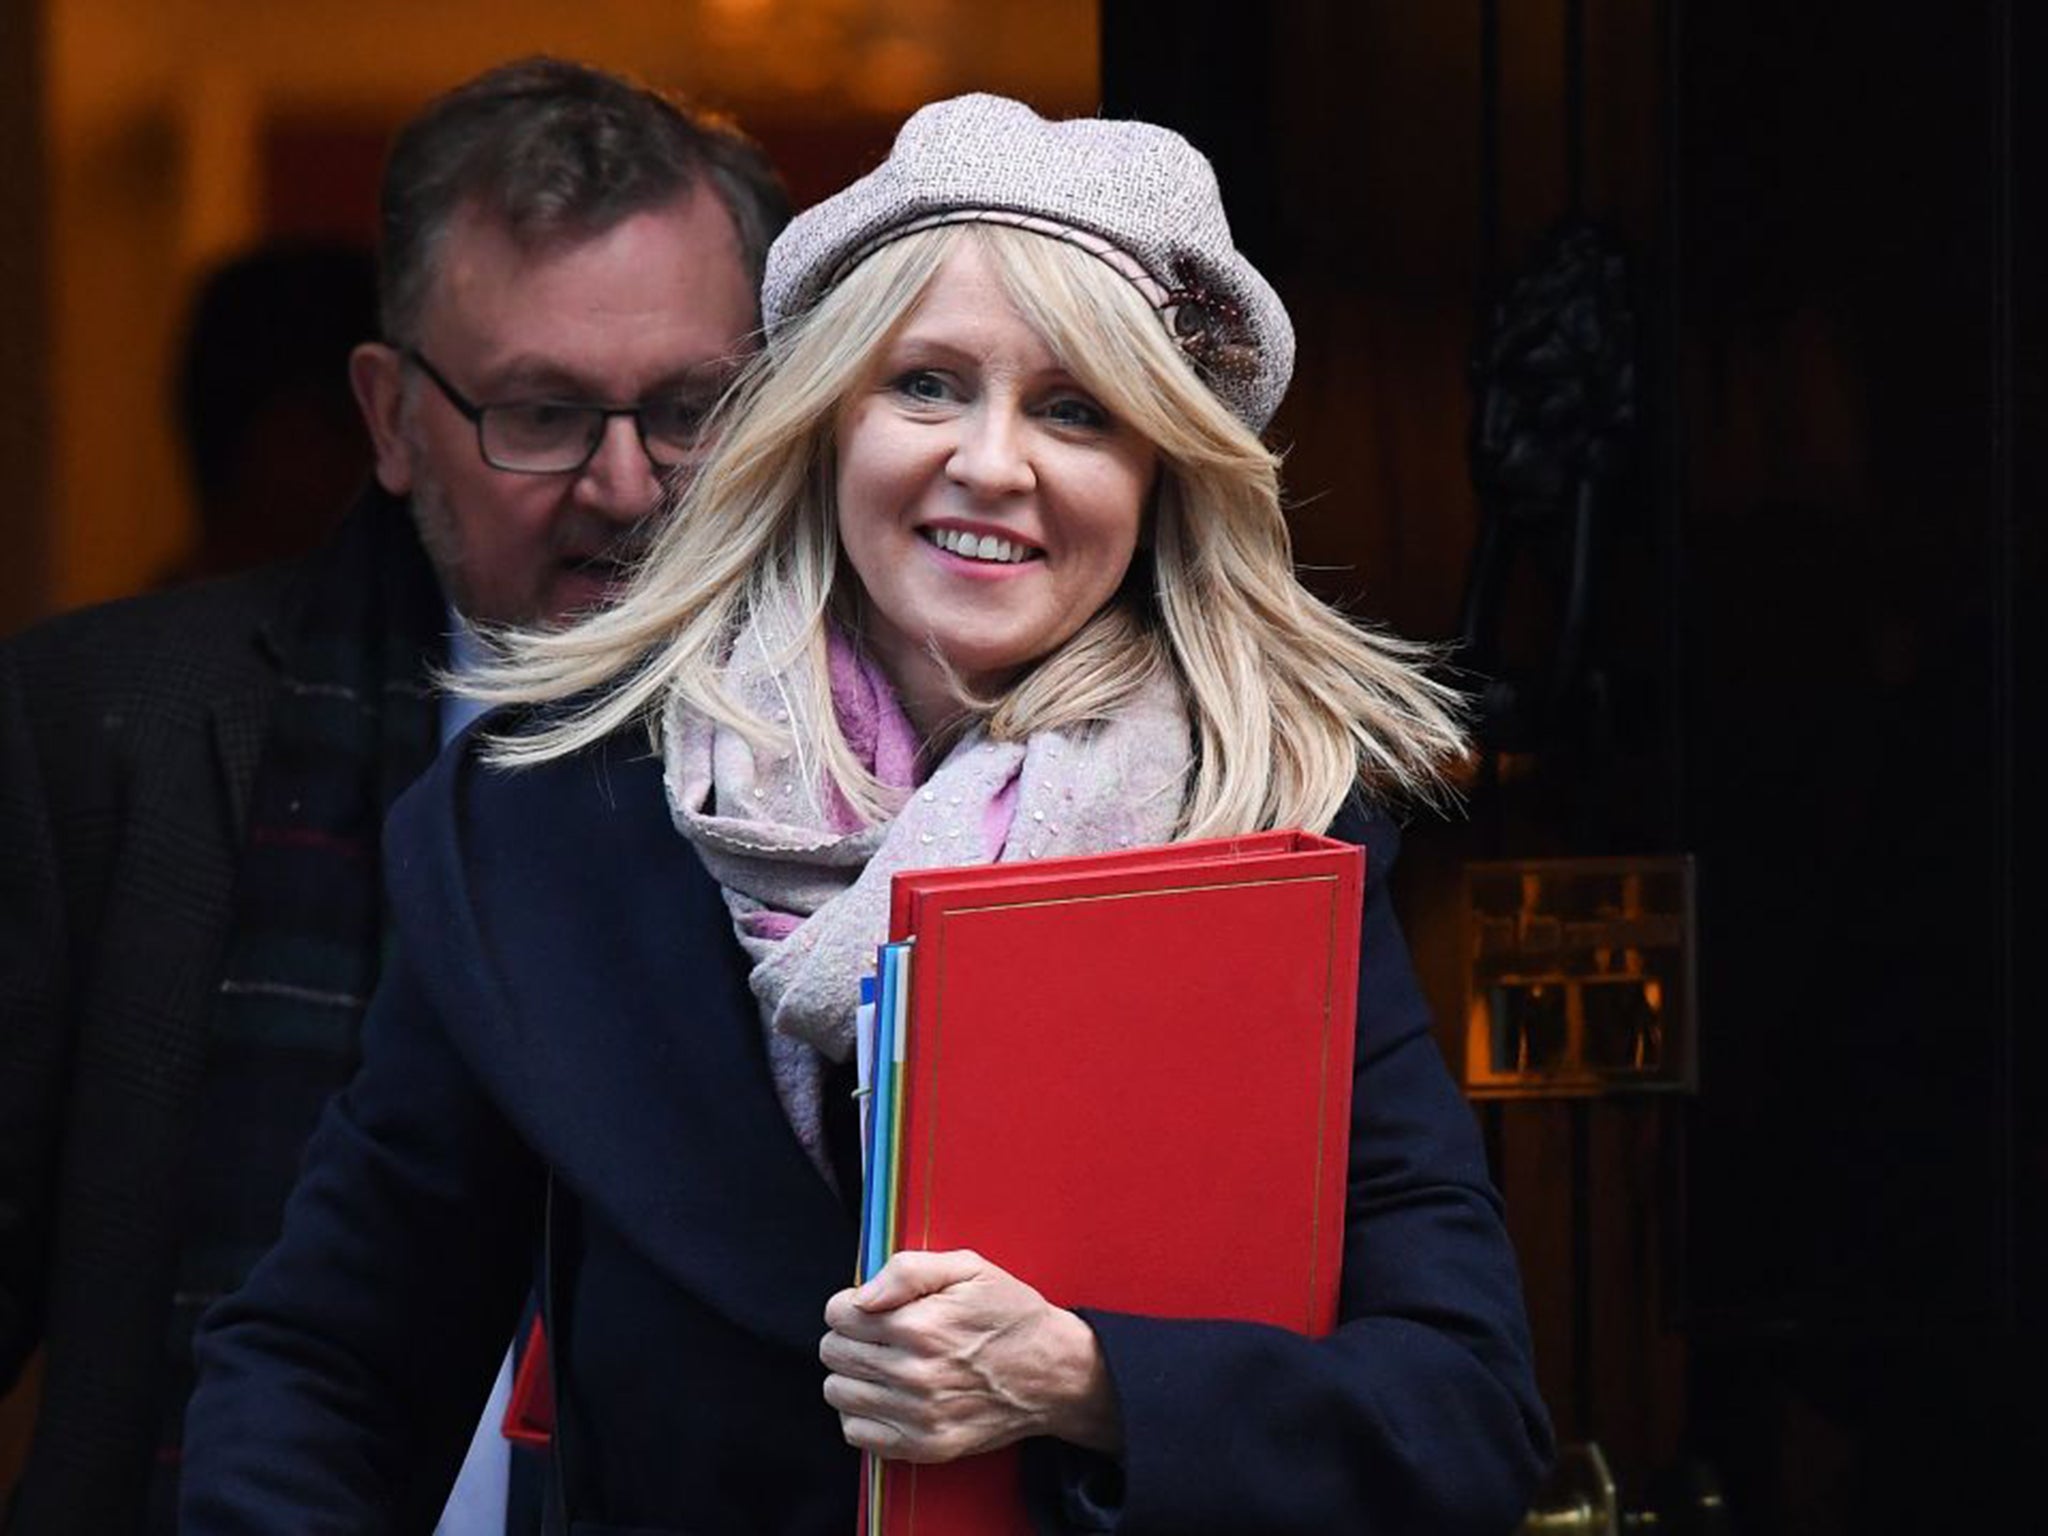 Esther McVey conceded there was ‘no point’ in fighting publication any longer